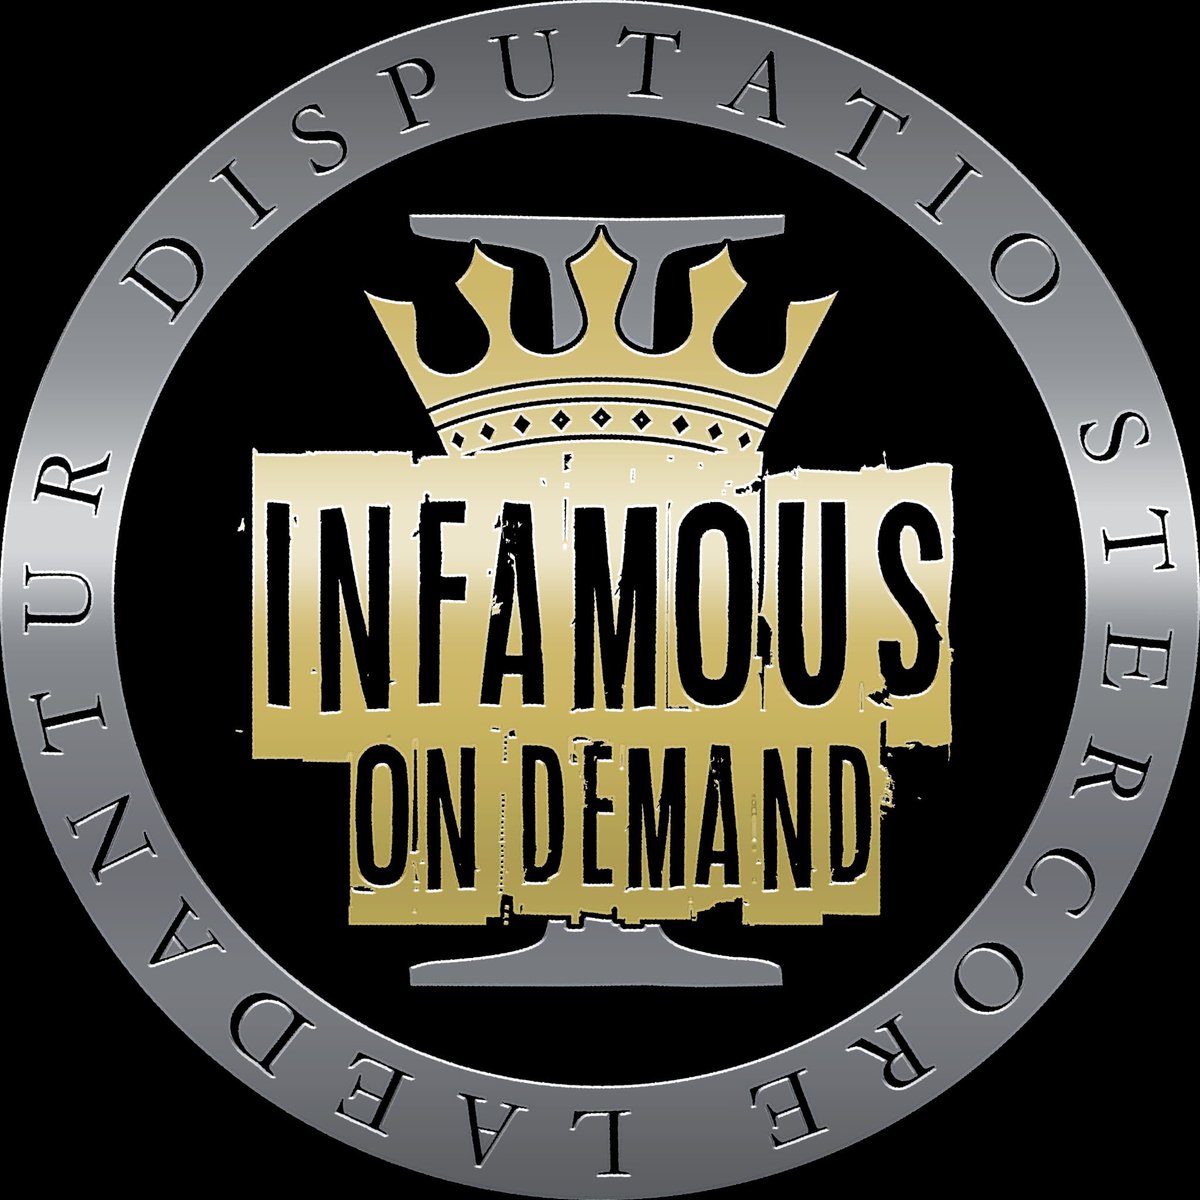 Hands up if you want a special @INFAMOUS_WP ticket deal! Plus you get Infamous on demand for the year which includes a £10 merch voucher to use as you please aaaannnnd entry into a prize draw!! We are serious too! No joke! #ThatEscalatedQuickly